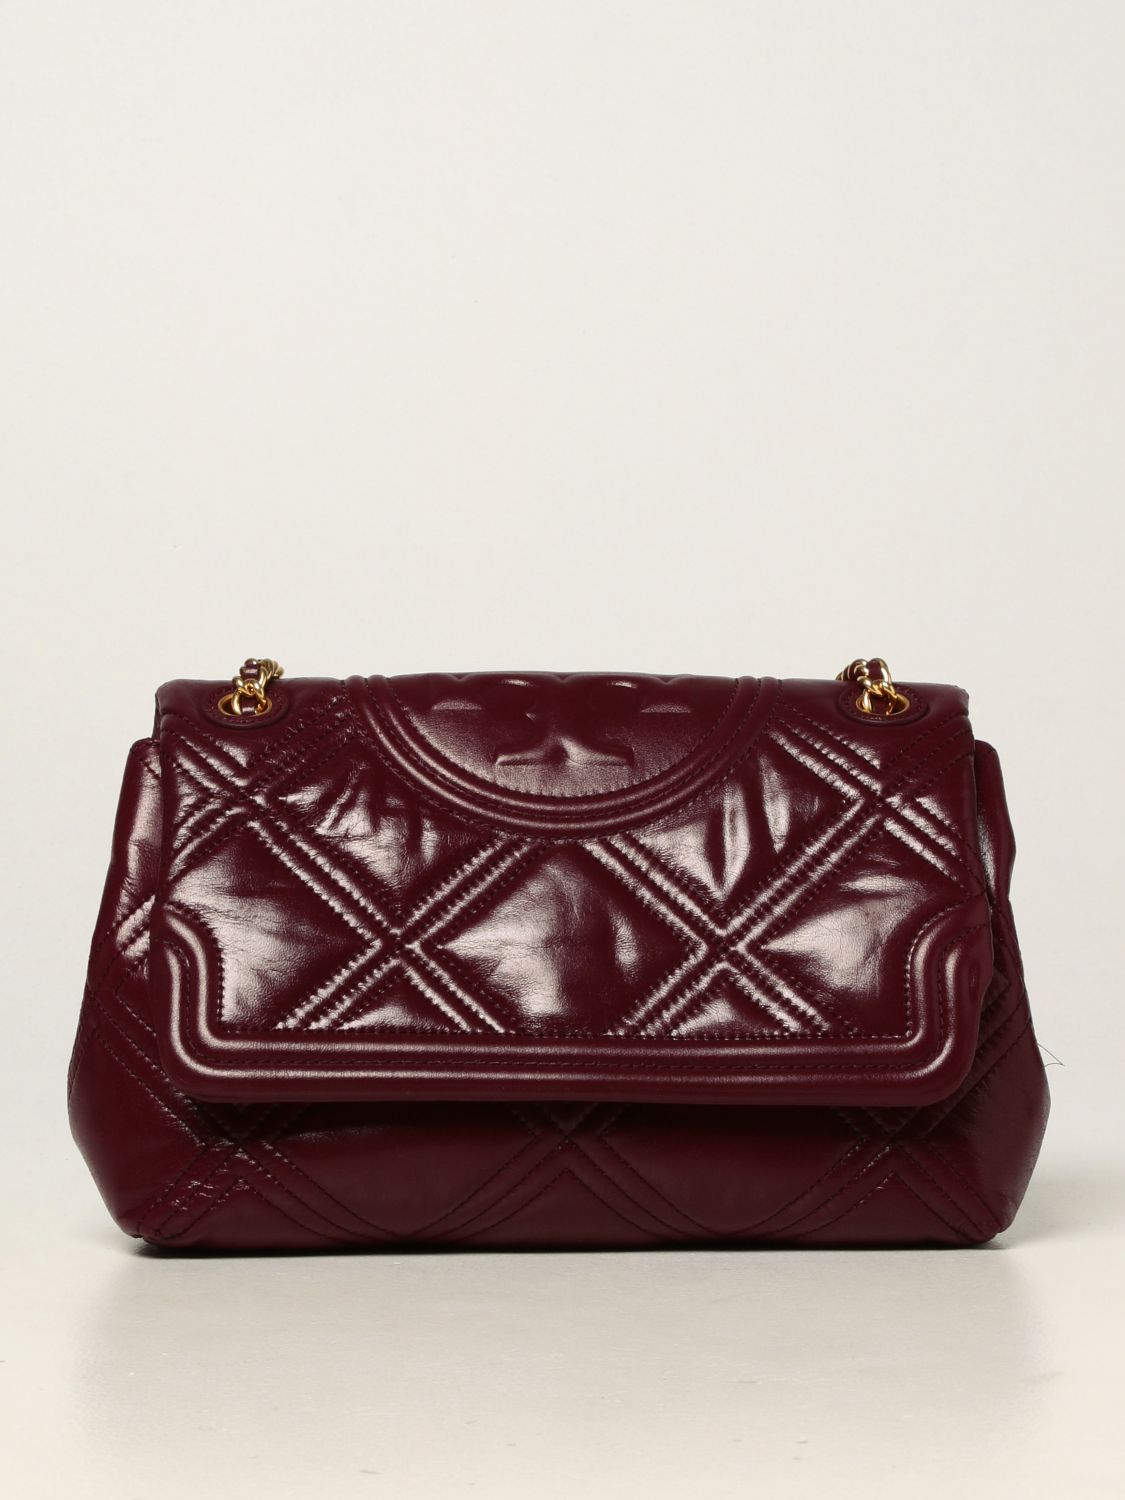 TORY BURCH: Fleming bag in quilted leather - Burgundy | Tory Burch  crossbody bags 82001 online on 